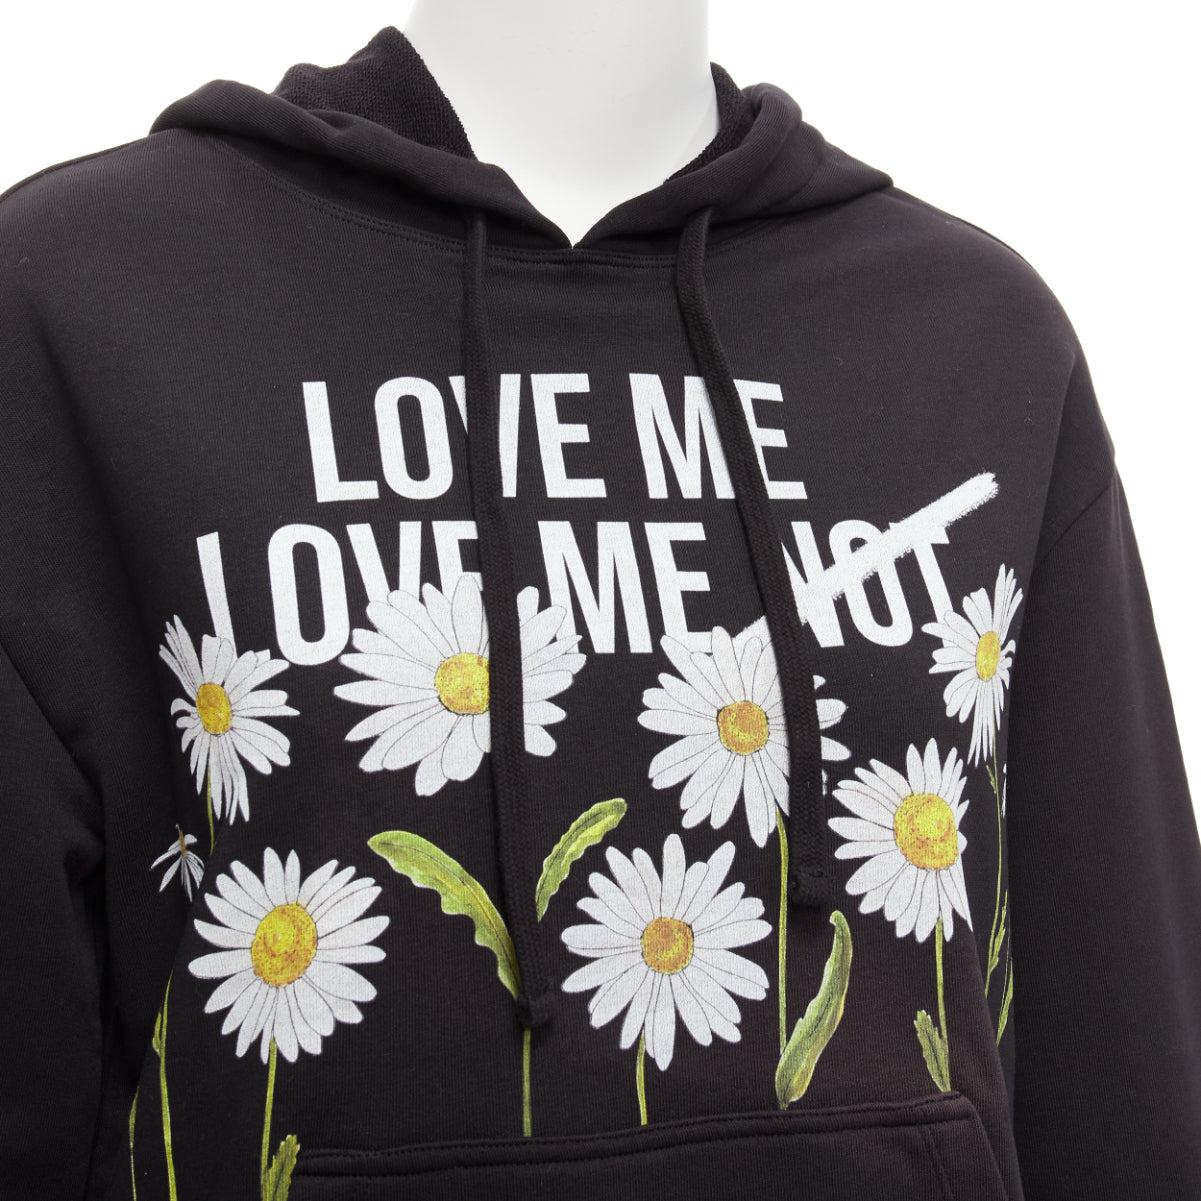 RED VALENTINO black cotton blend Love Me Not daisy print pocketed hoodie XS
Reference: AAWC/A00803
Brand: Red Valentino
Material: Cotton, Blend
Color: Black
Pattern: Floral
Closure: Slip On
Made in: Turkey

CONDITION:
Condition: Good, this item was